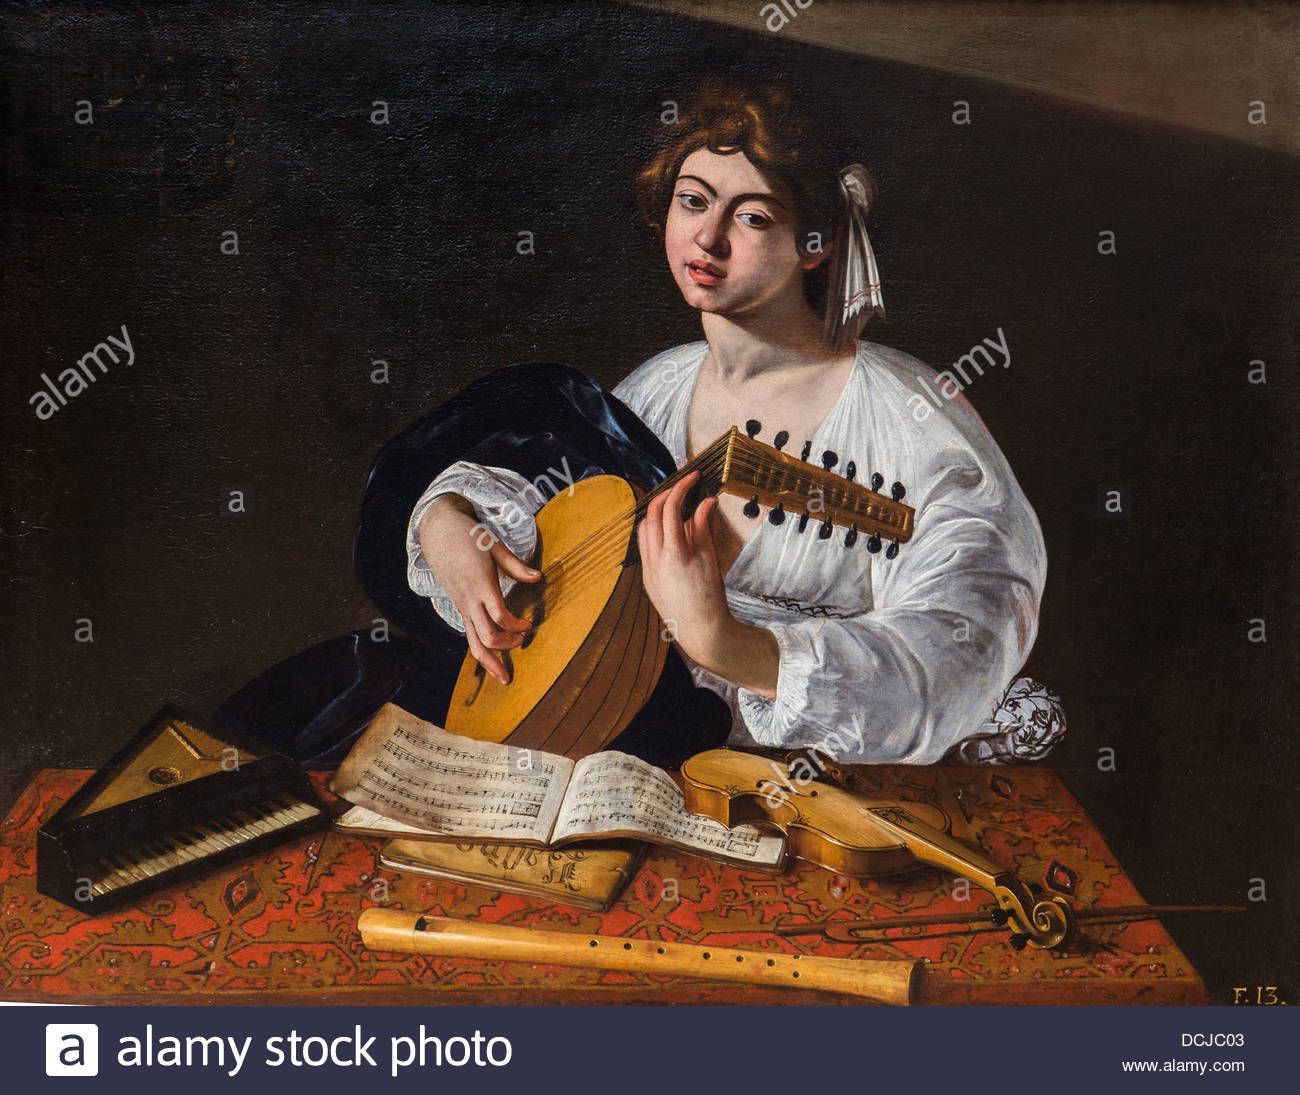 Hound D. reccomend Erotic lute player